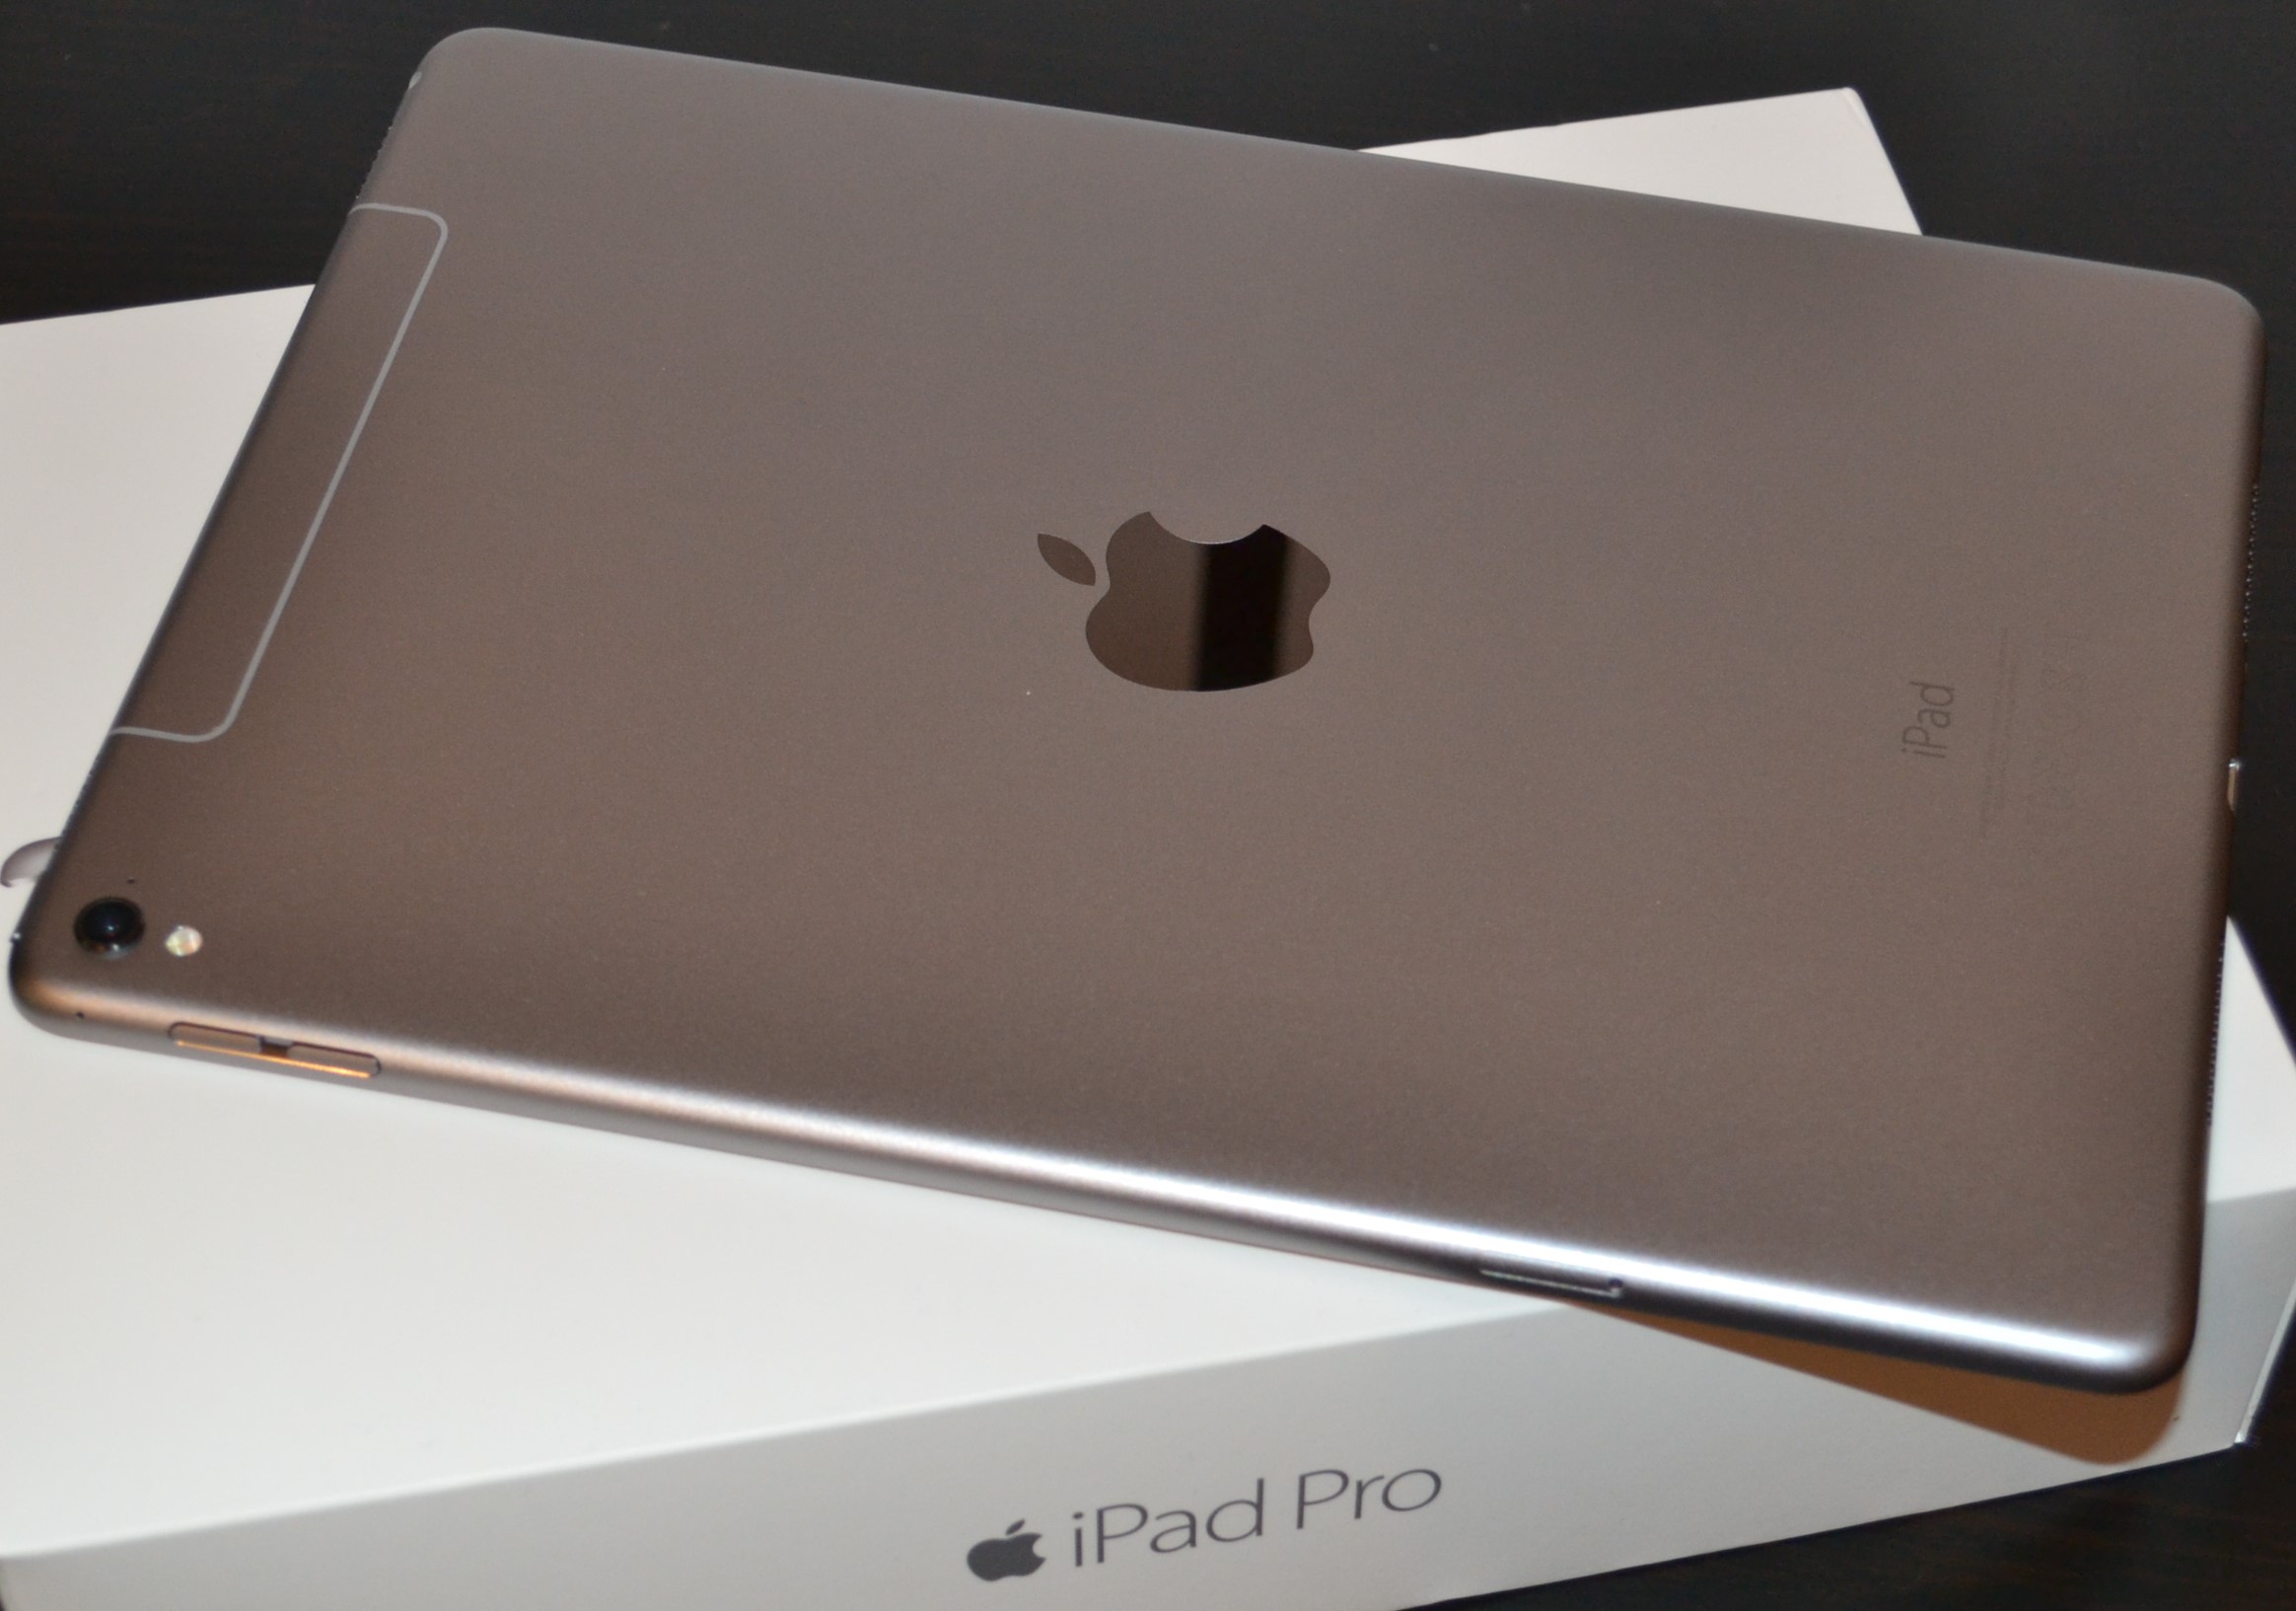 ipad pro 9.7 inch review 1